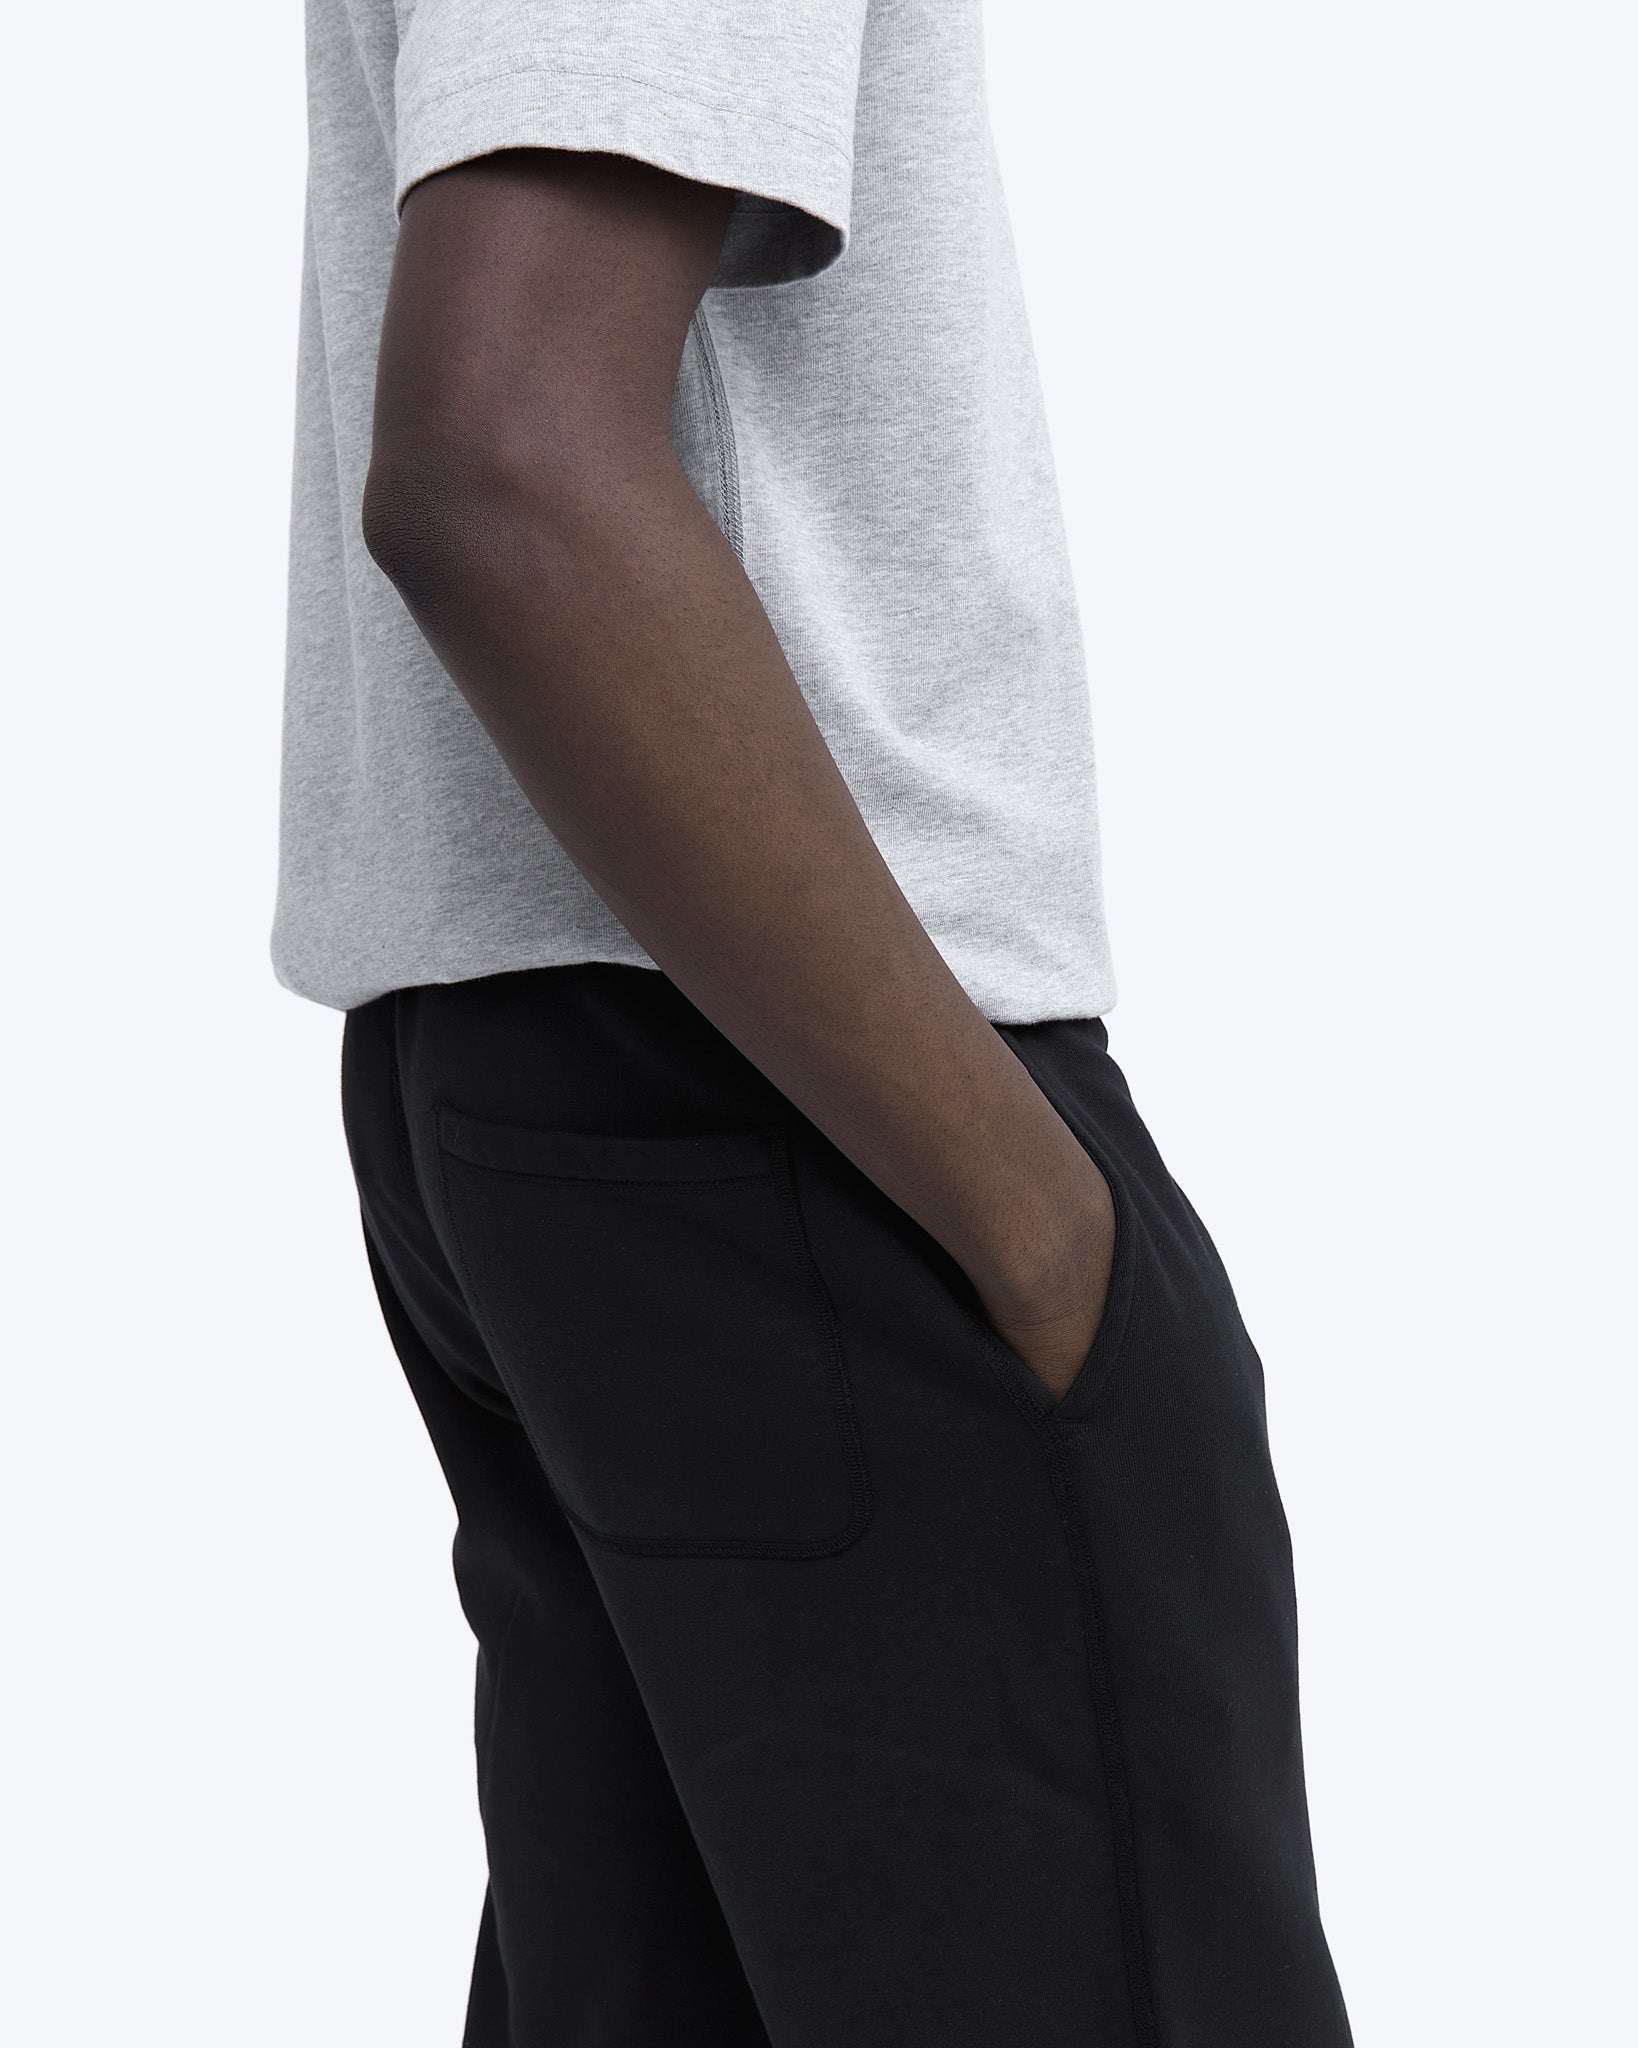 MIDWEIGHT TERRY RELAXED SWEATPANT - BLACK